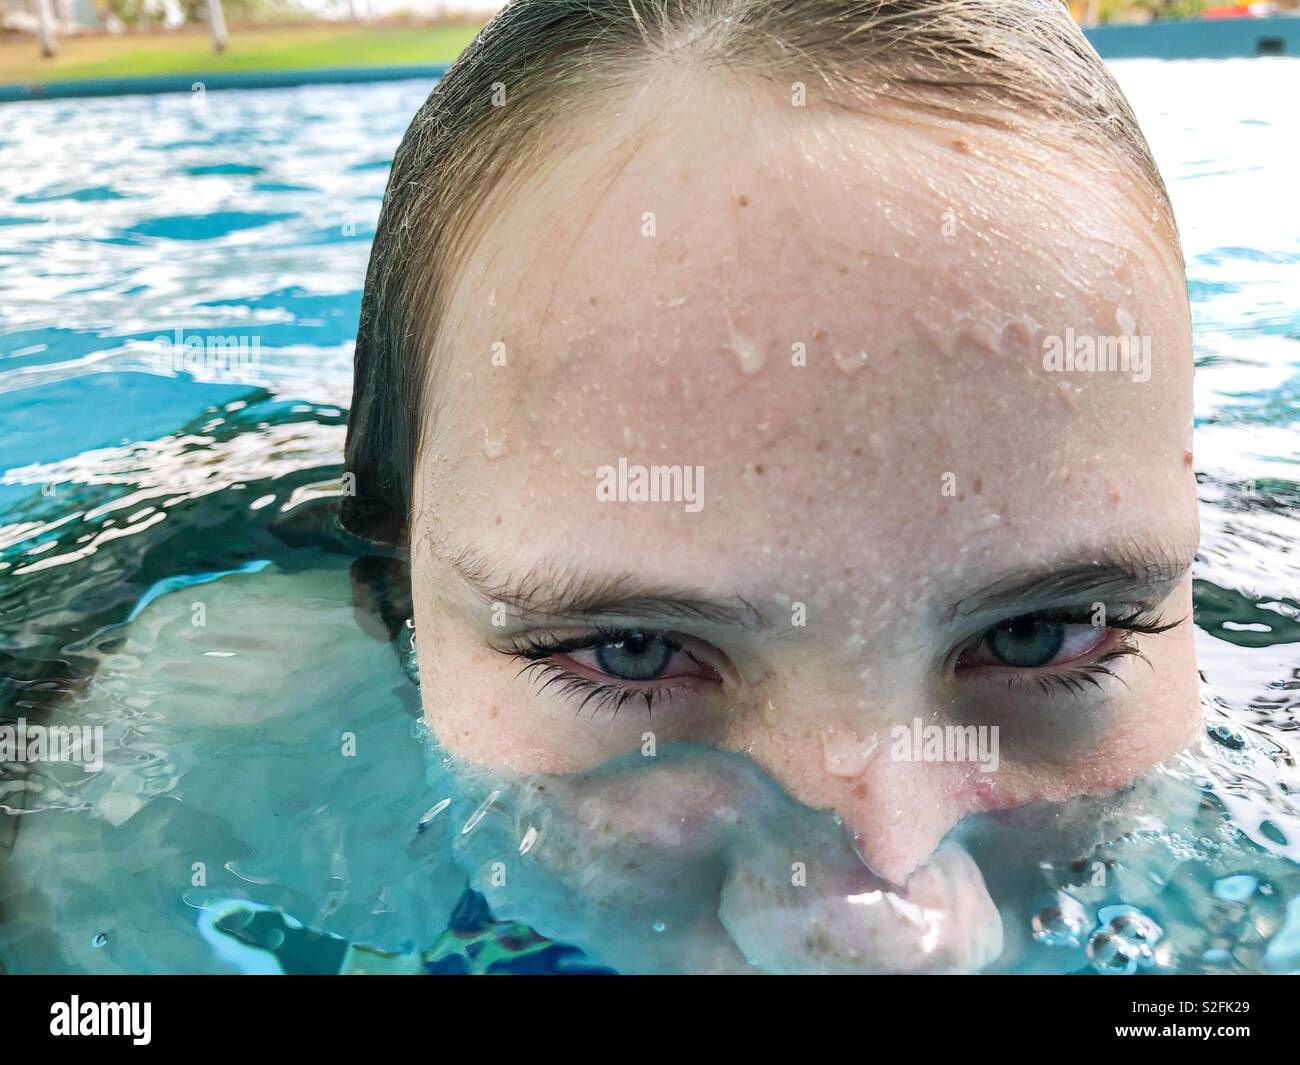 Close up portrait of a girl in a swimming pool. Stock Photo